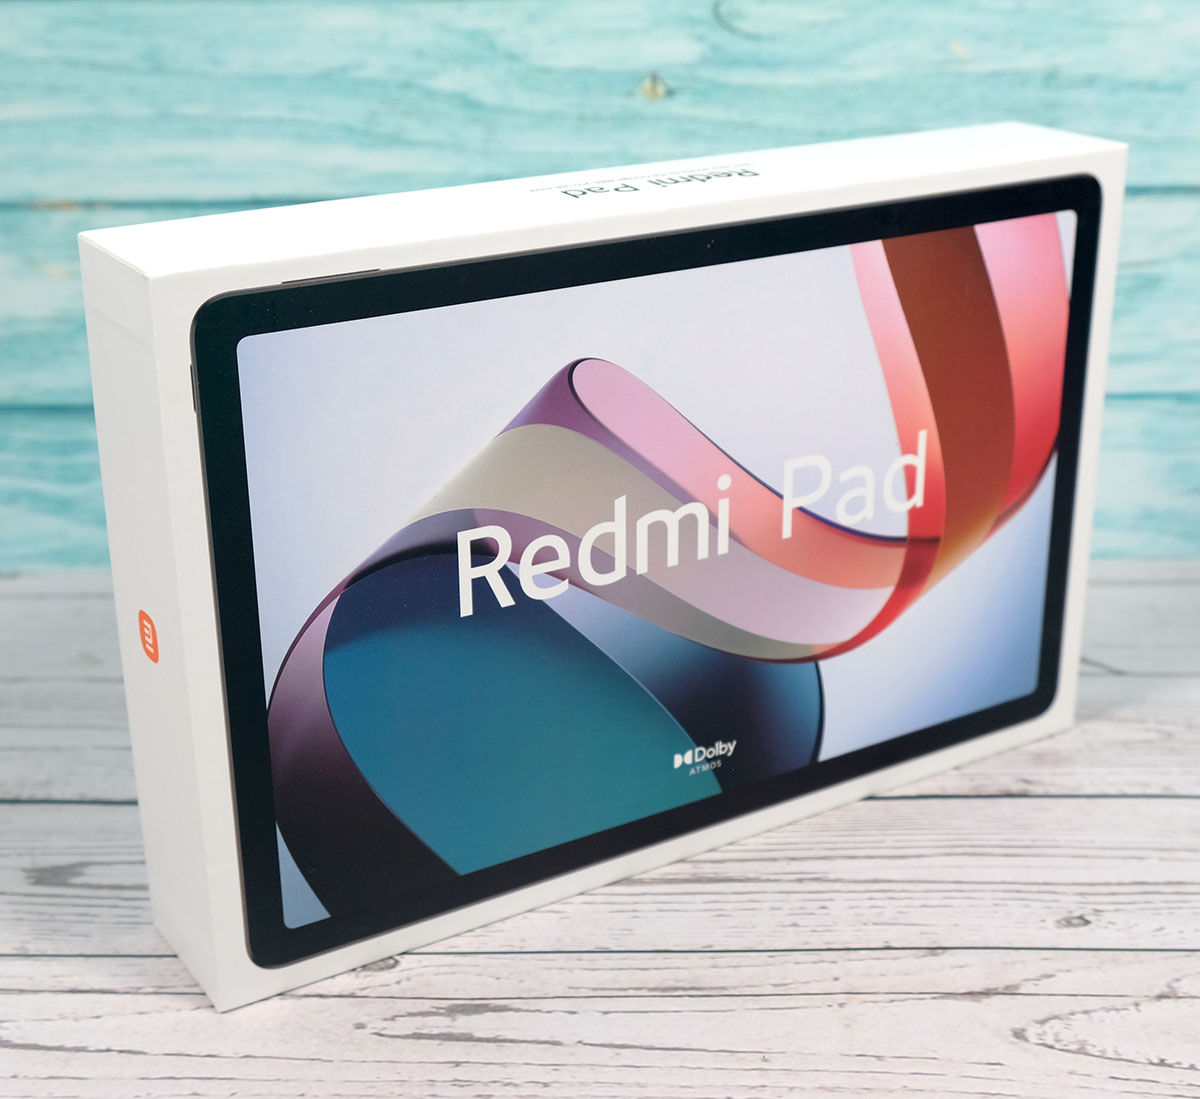 Redmi Pad SE launches globally as an affordable tablet with